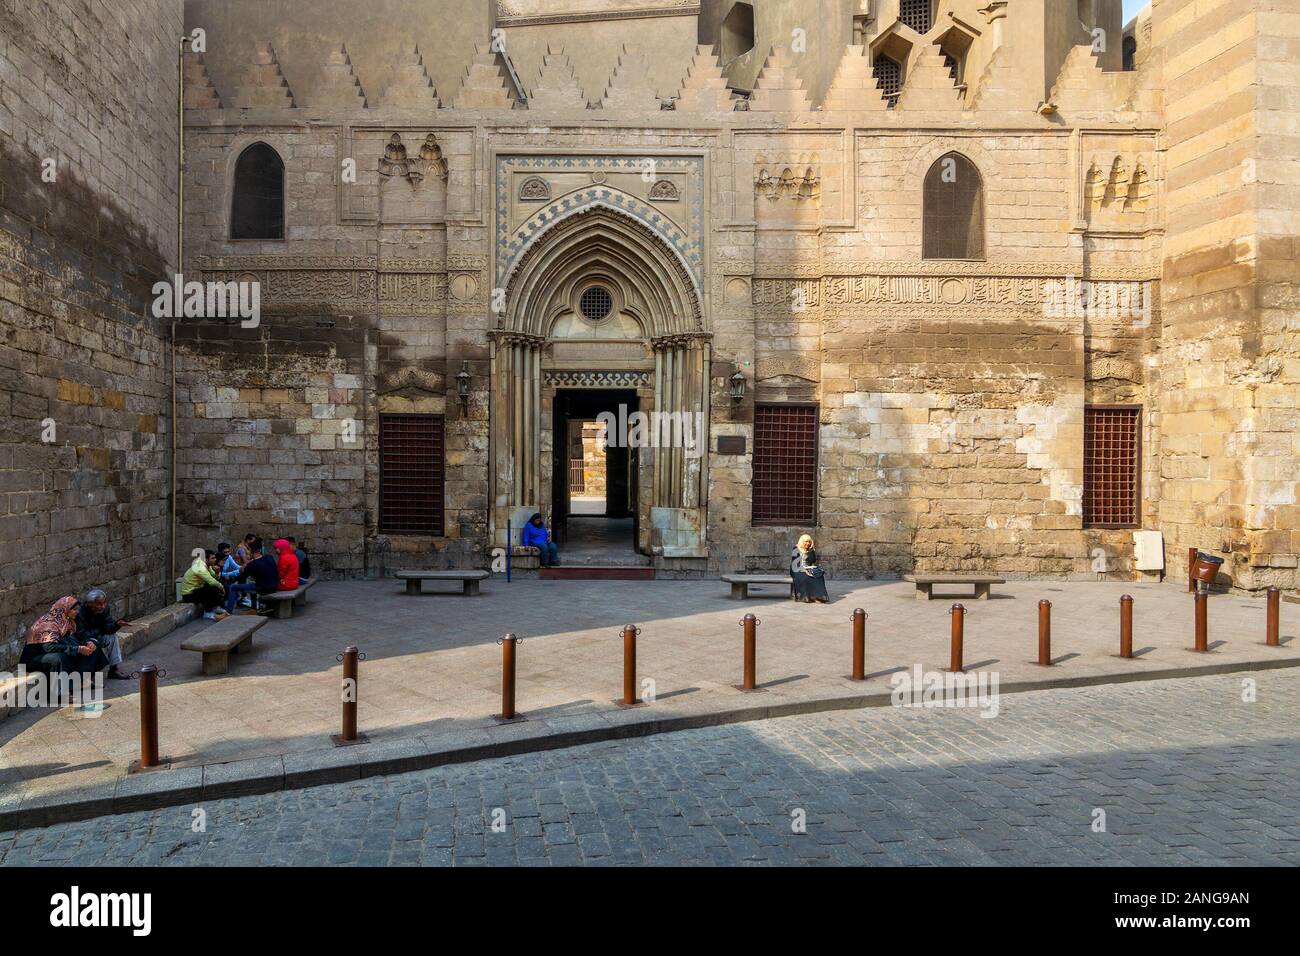 Cairo, Egypt- November 11 2016: Entrance of theological school and Mausoleum of Sultan Qalawun, Moez Street Stock Photo